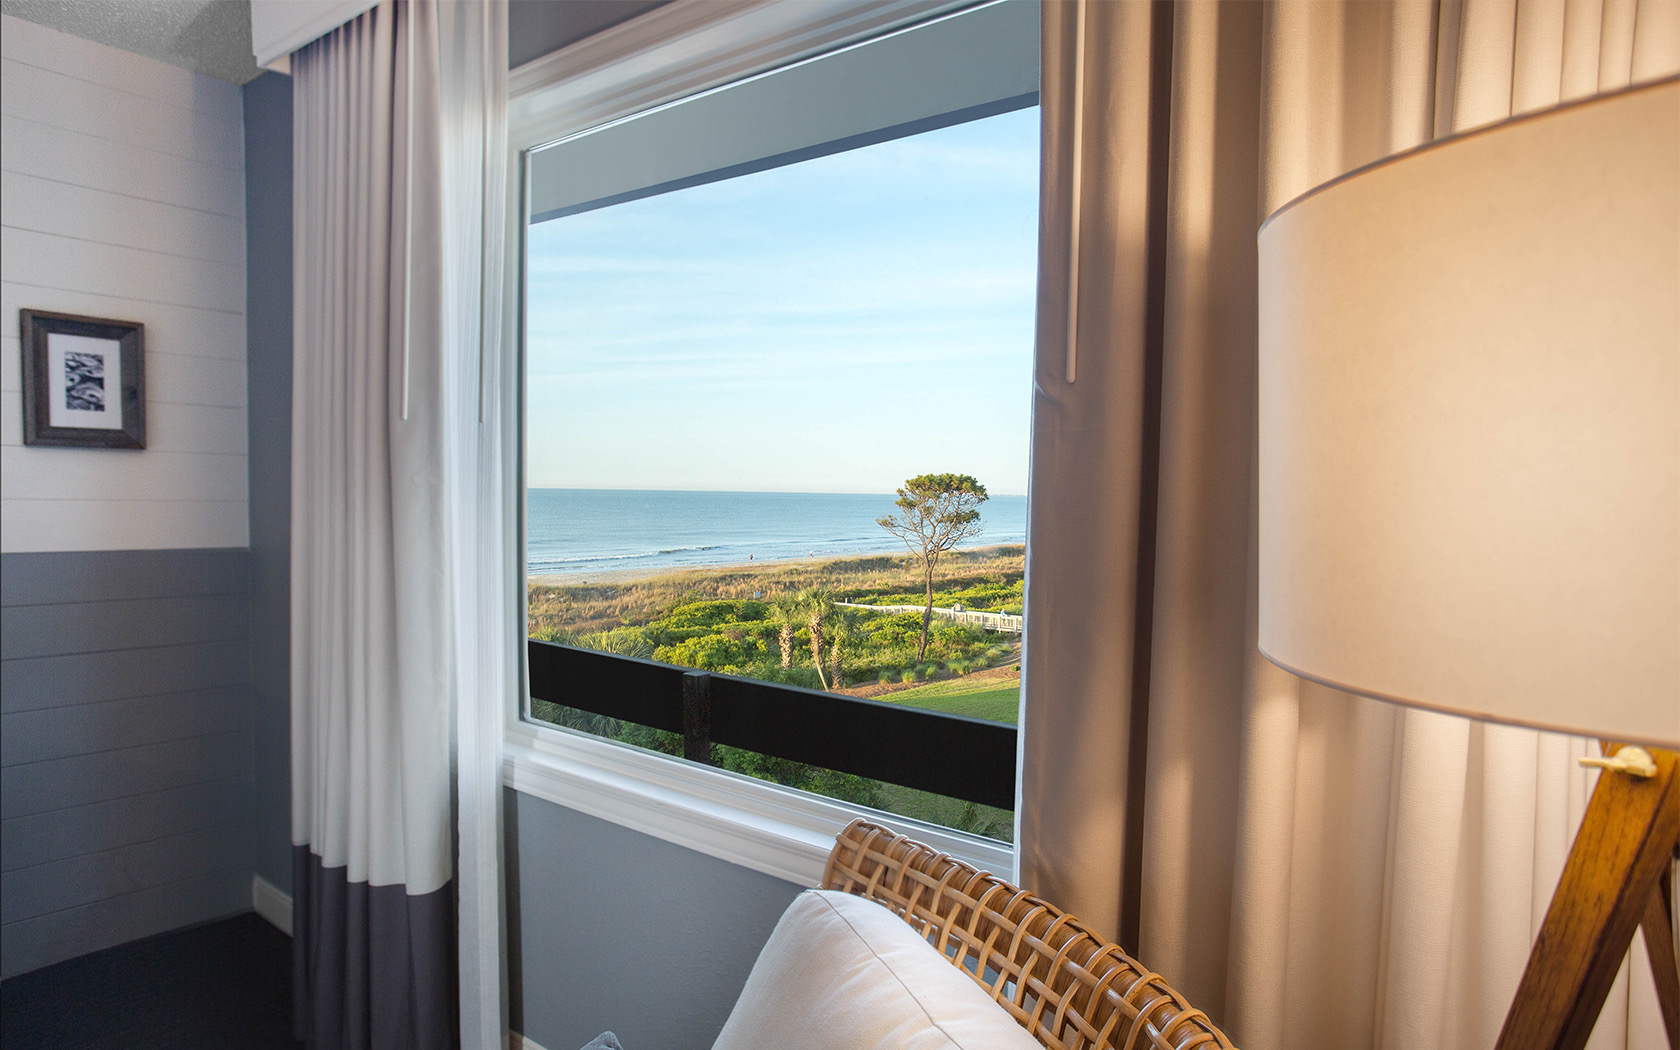 a window from a room with a view of the green grass and the ocean 